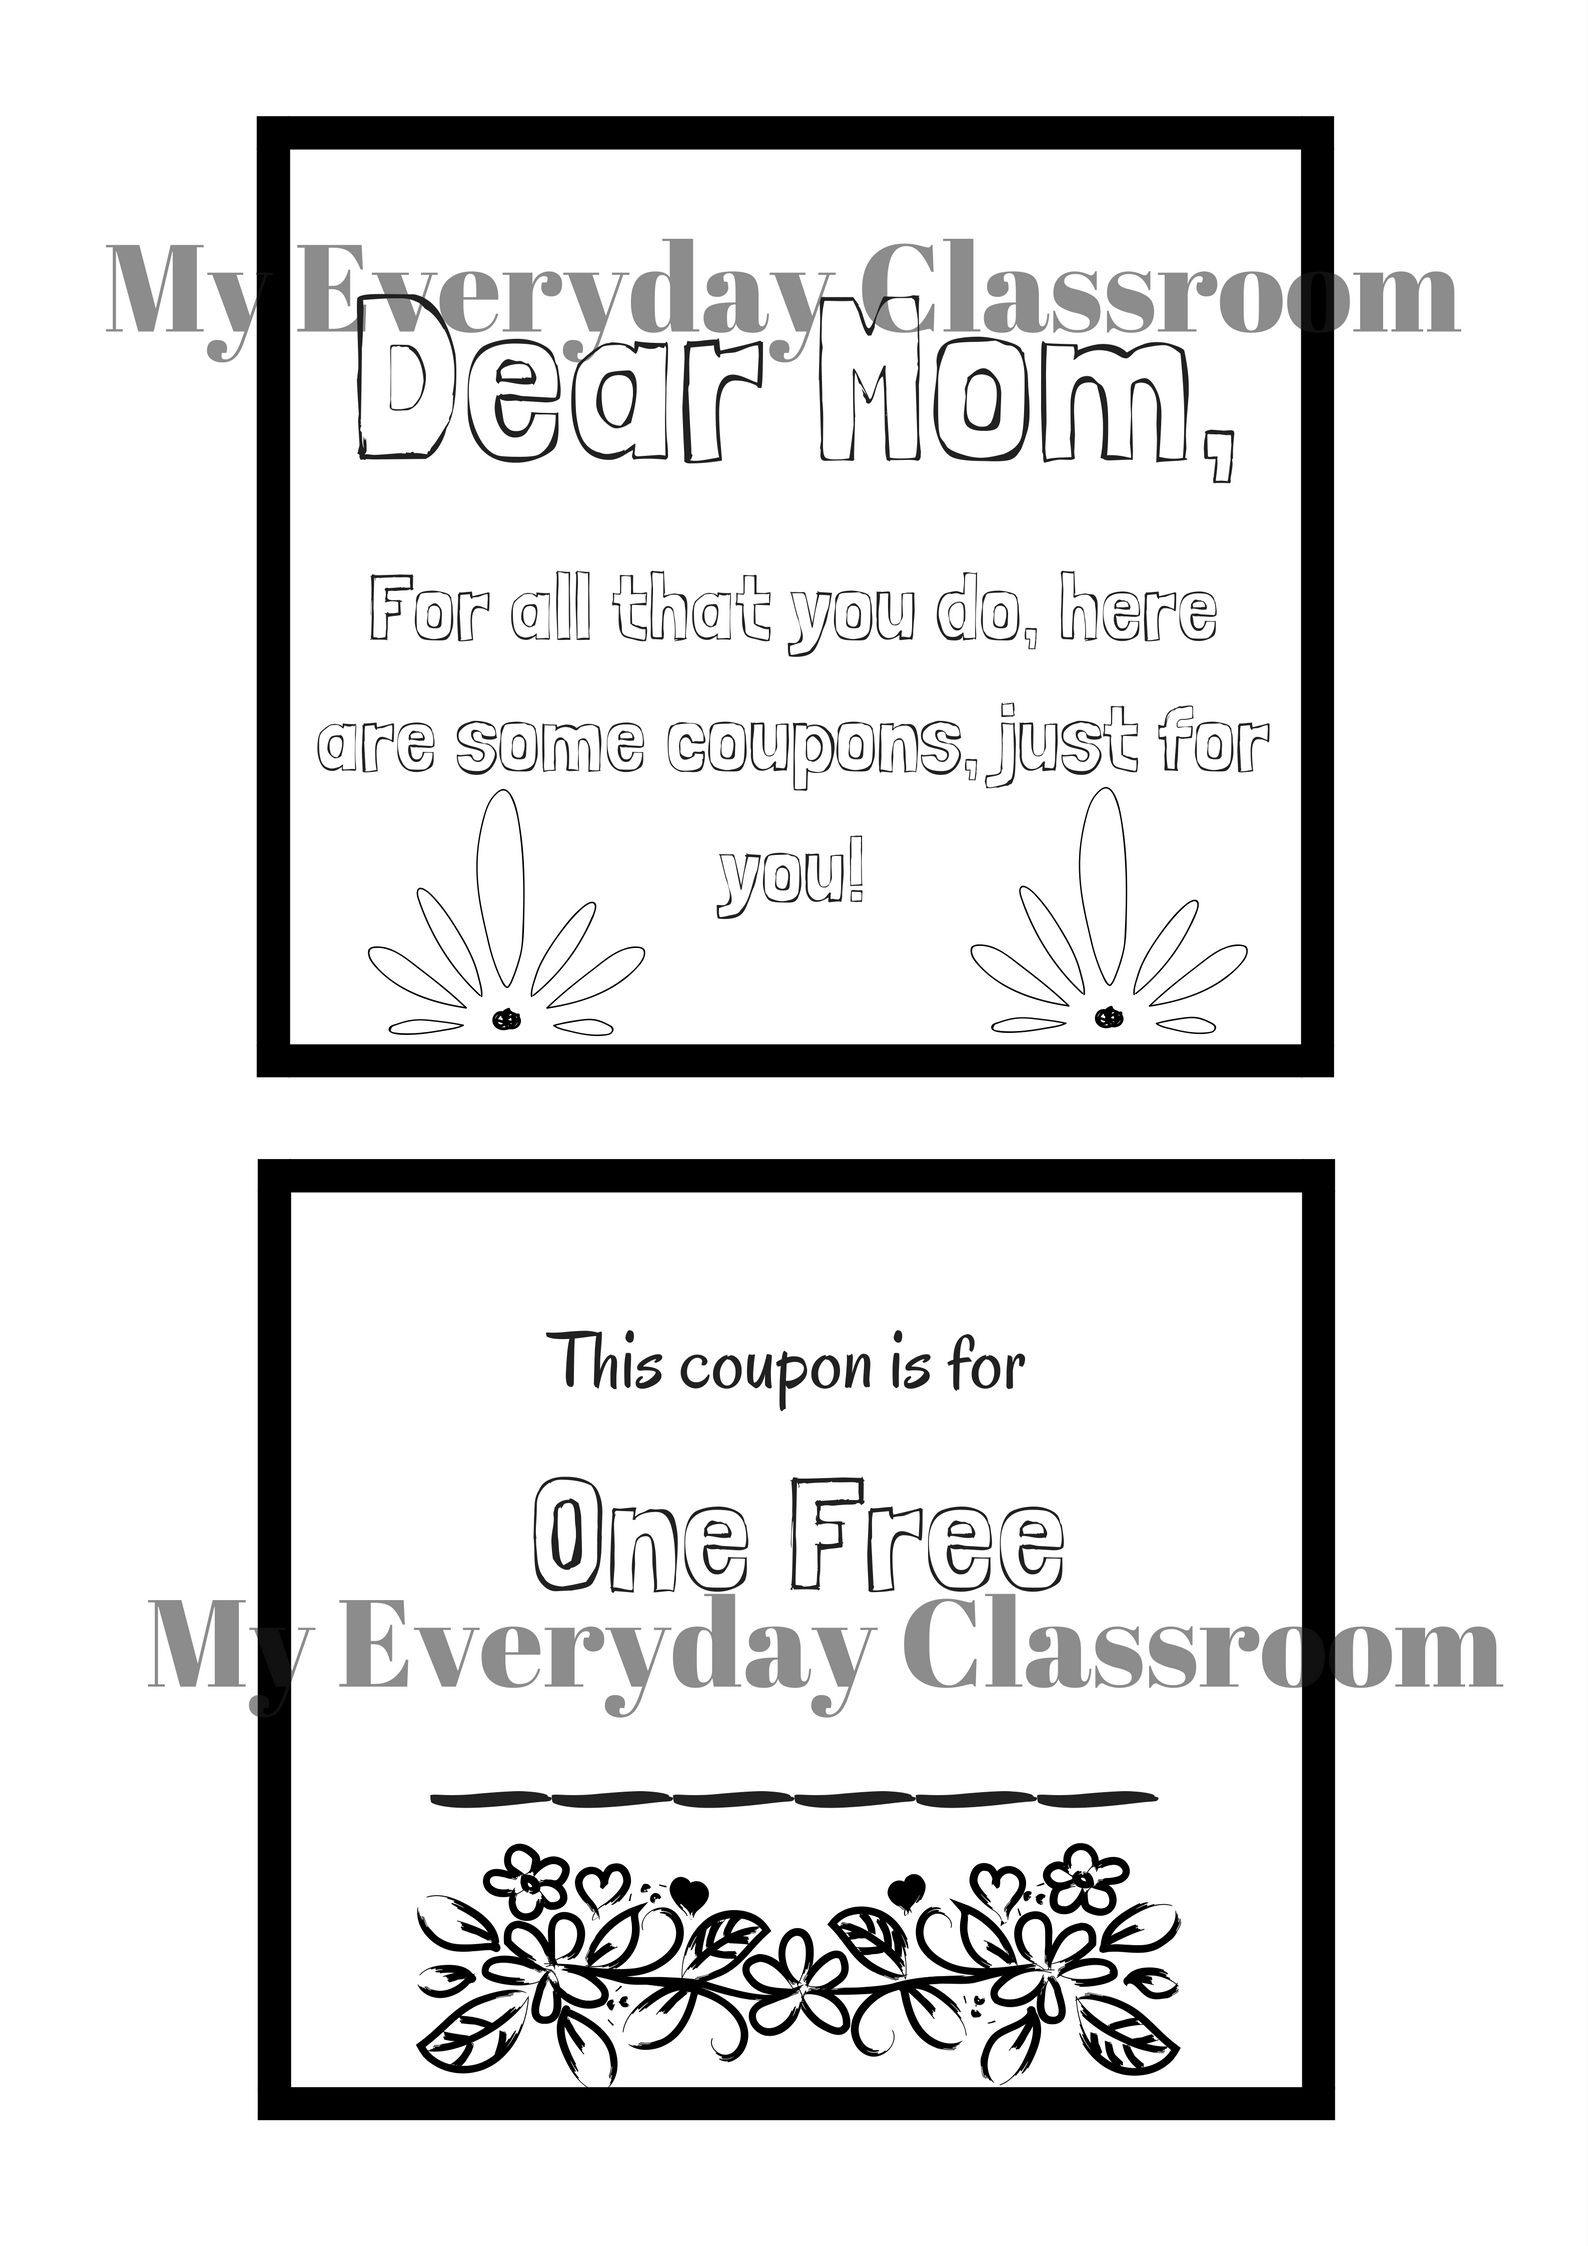 This is an adorable Mother's Day coupon booklet activity. Students will get to create and design coupon's to give to their moms. 